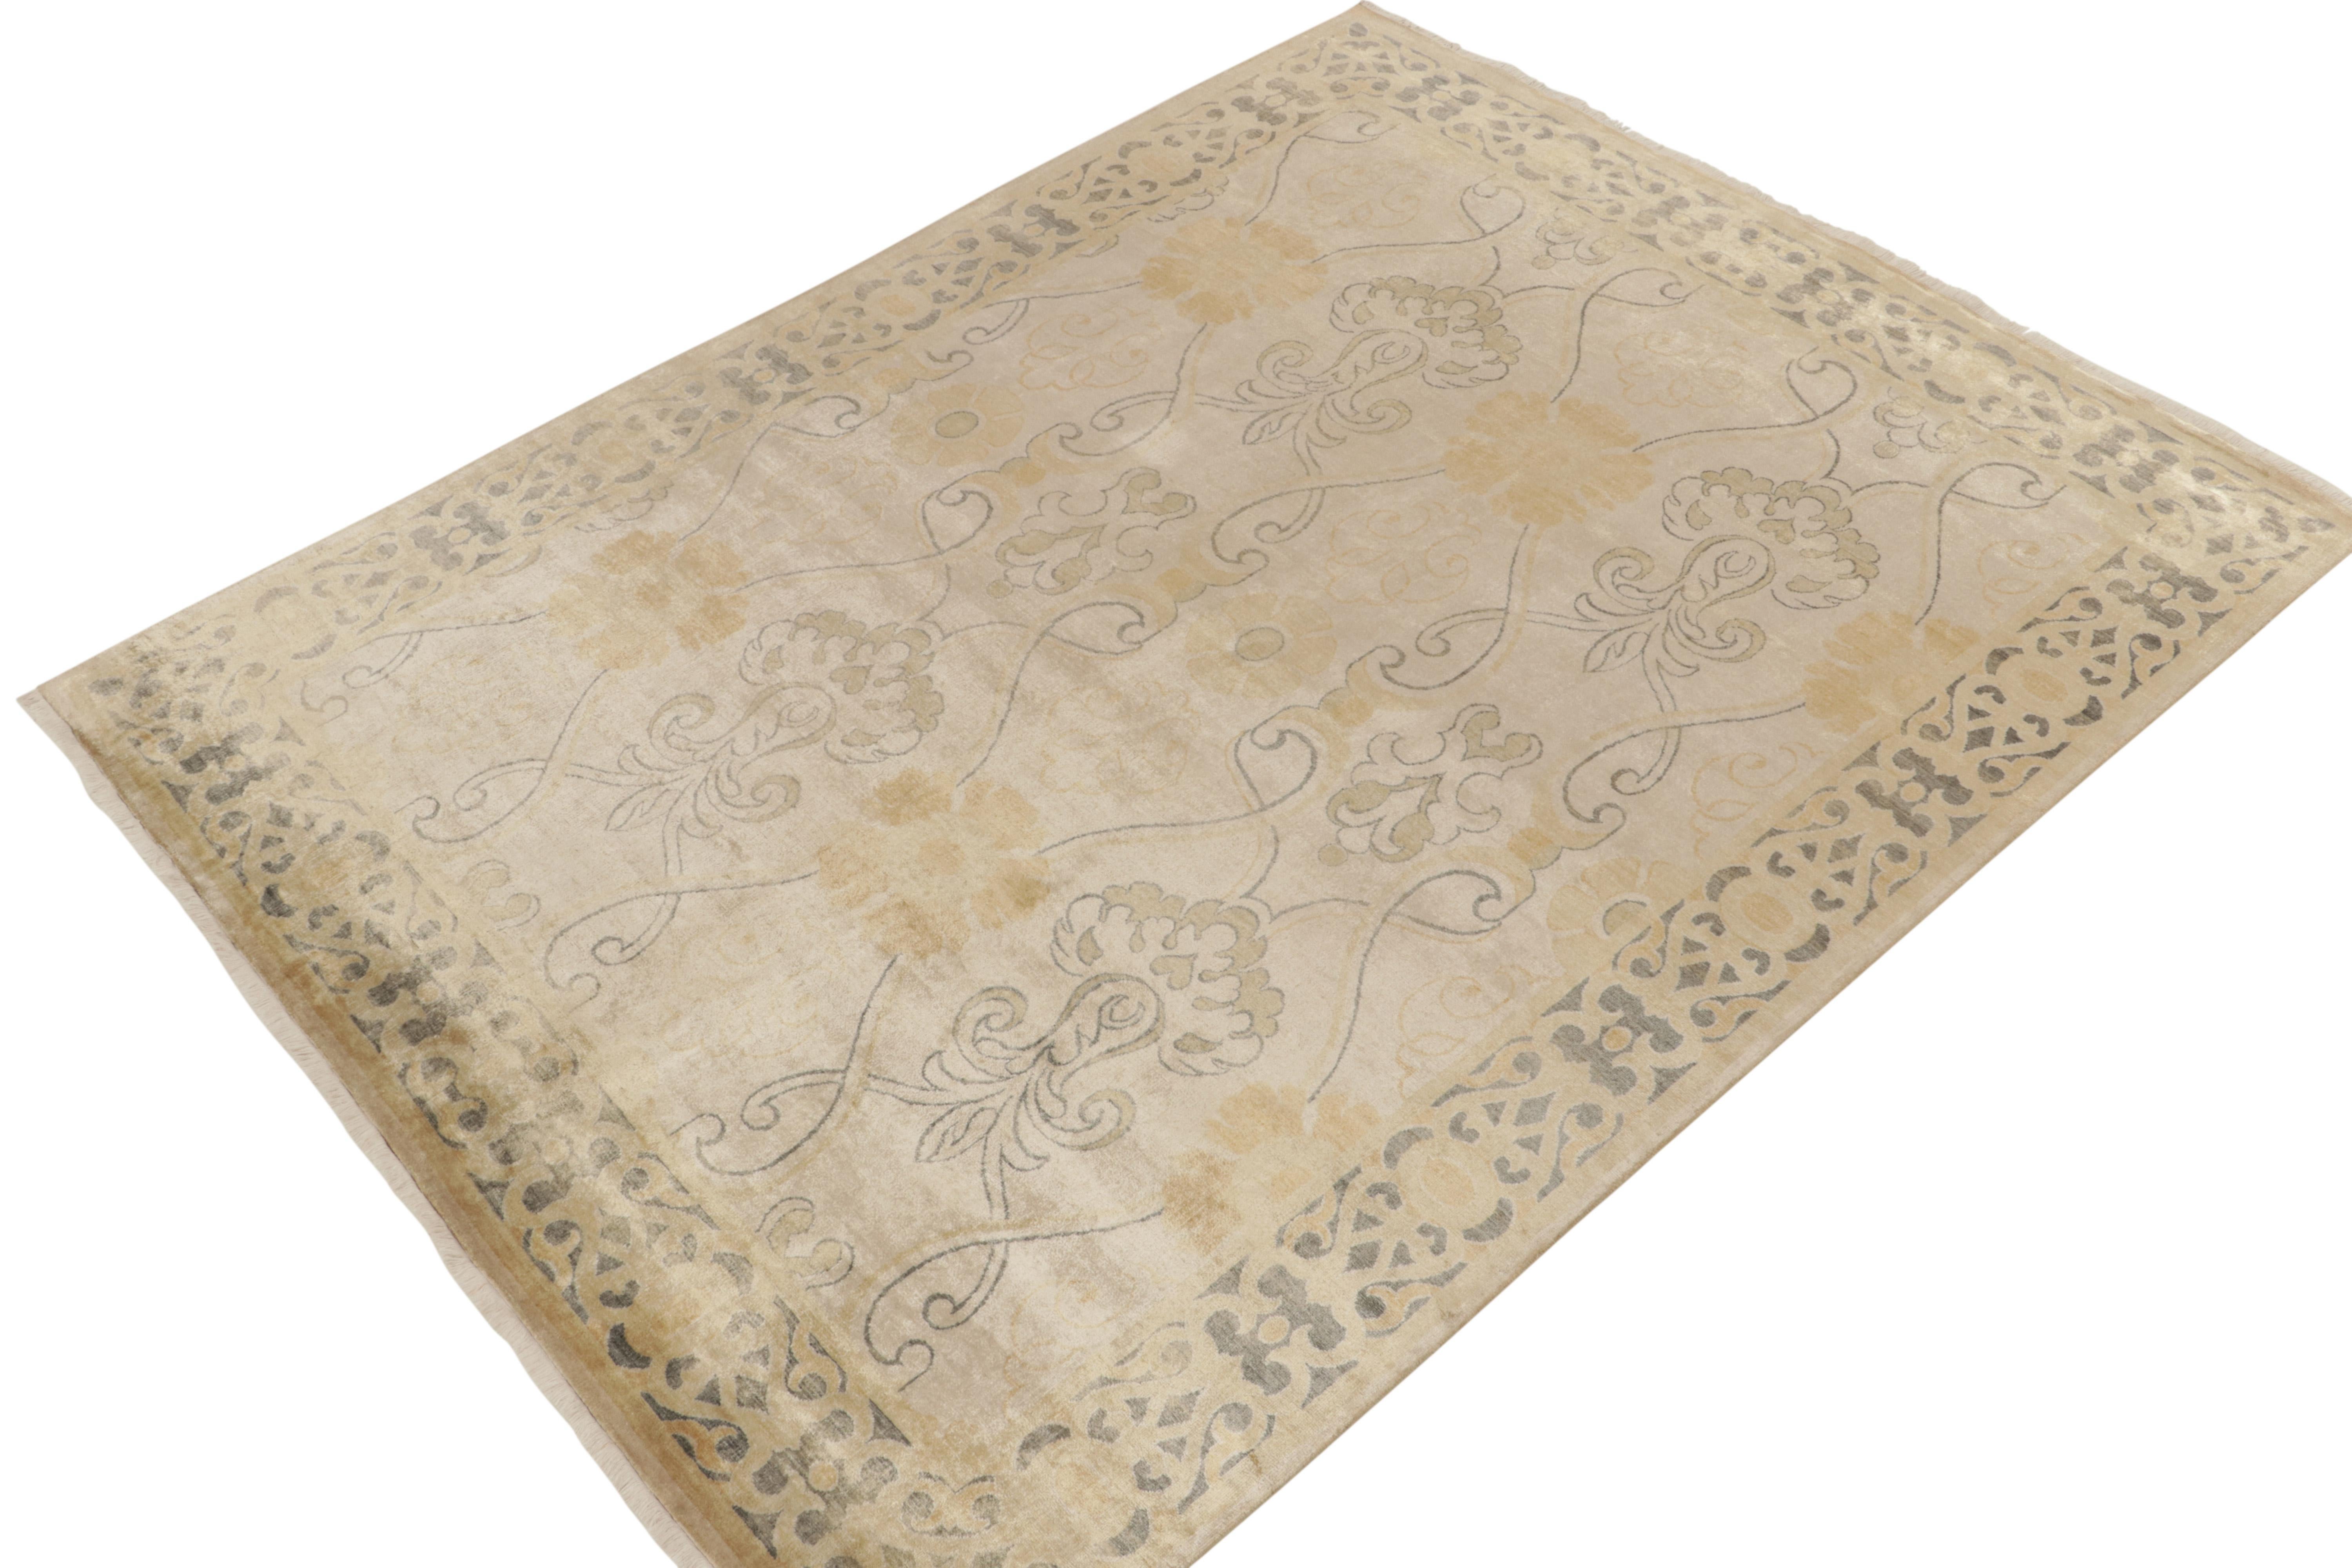 Hand-knotted in luxurious silk, this 8x10 from our Modern Classics collection marks a unique take on antique Art Nouveau rug styles. 

On the Design: A gracious scale hosts curvaceous trellises and florals in the most elegant play of beige and